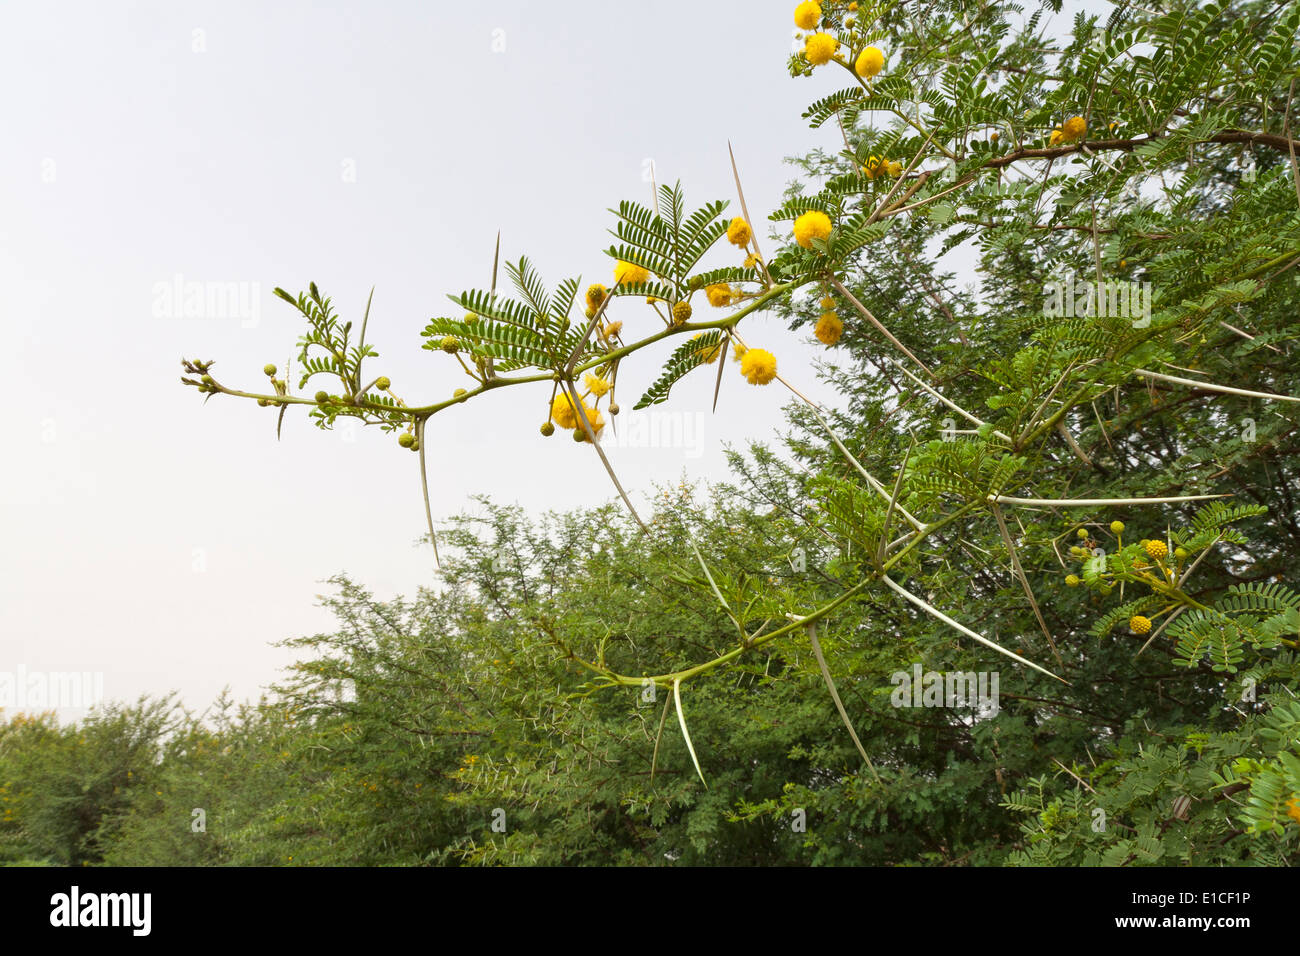 Detail of a Vachellia farnesiana bush with yellow flowers and spines Stock Photo